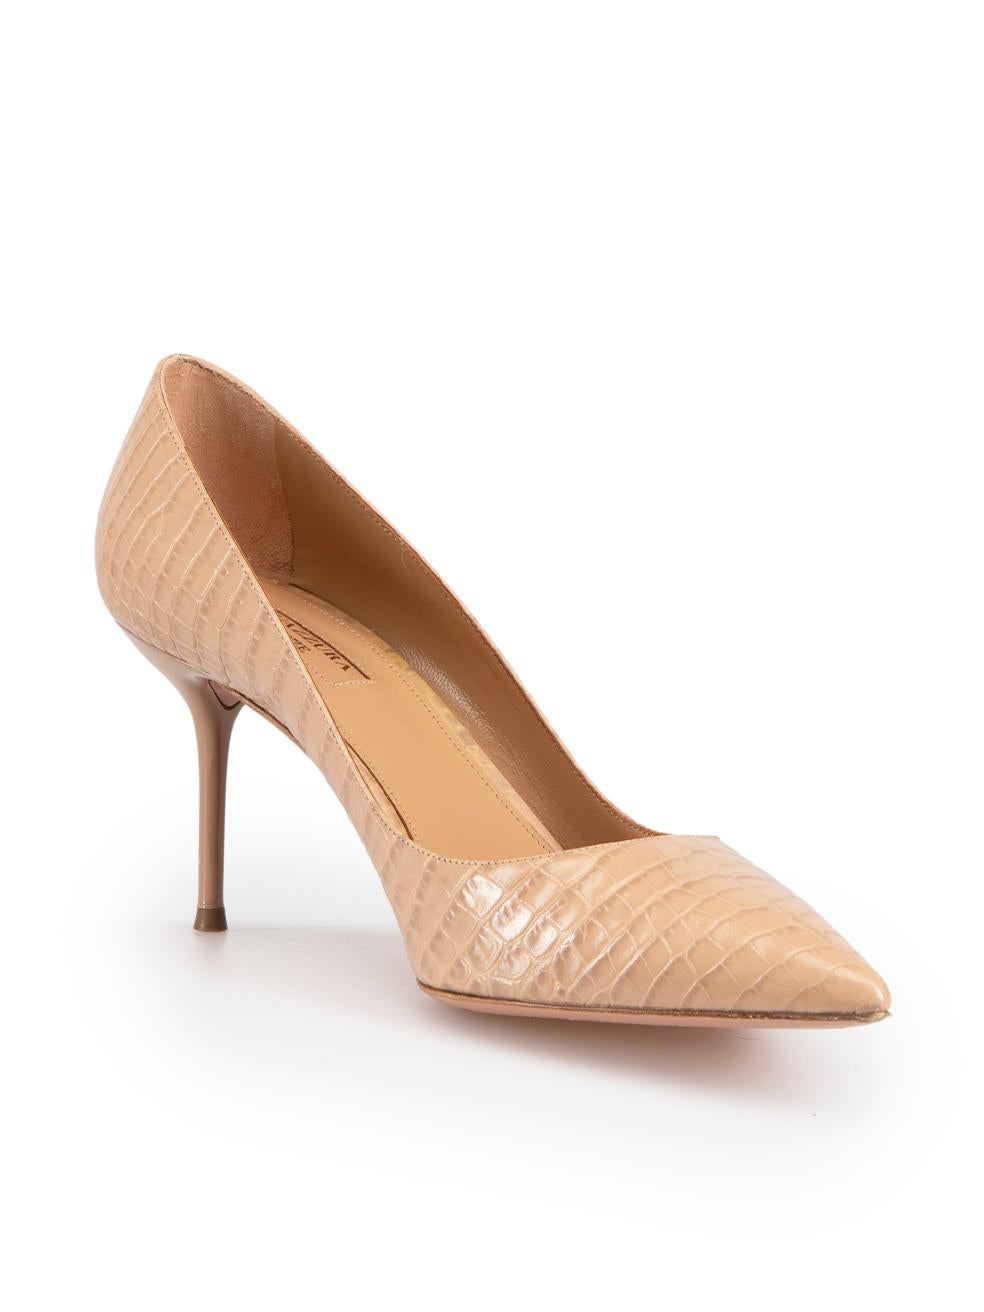 CONDITION is Very good. Minimal wear to shoes is evident. Minimal wear to the left shoe heel with tiny mark on this used Aquazzura designer resale item. These shoes come with original box and dust bag.

Details
Purist
Beige
Leather
Heels
Croc